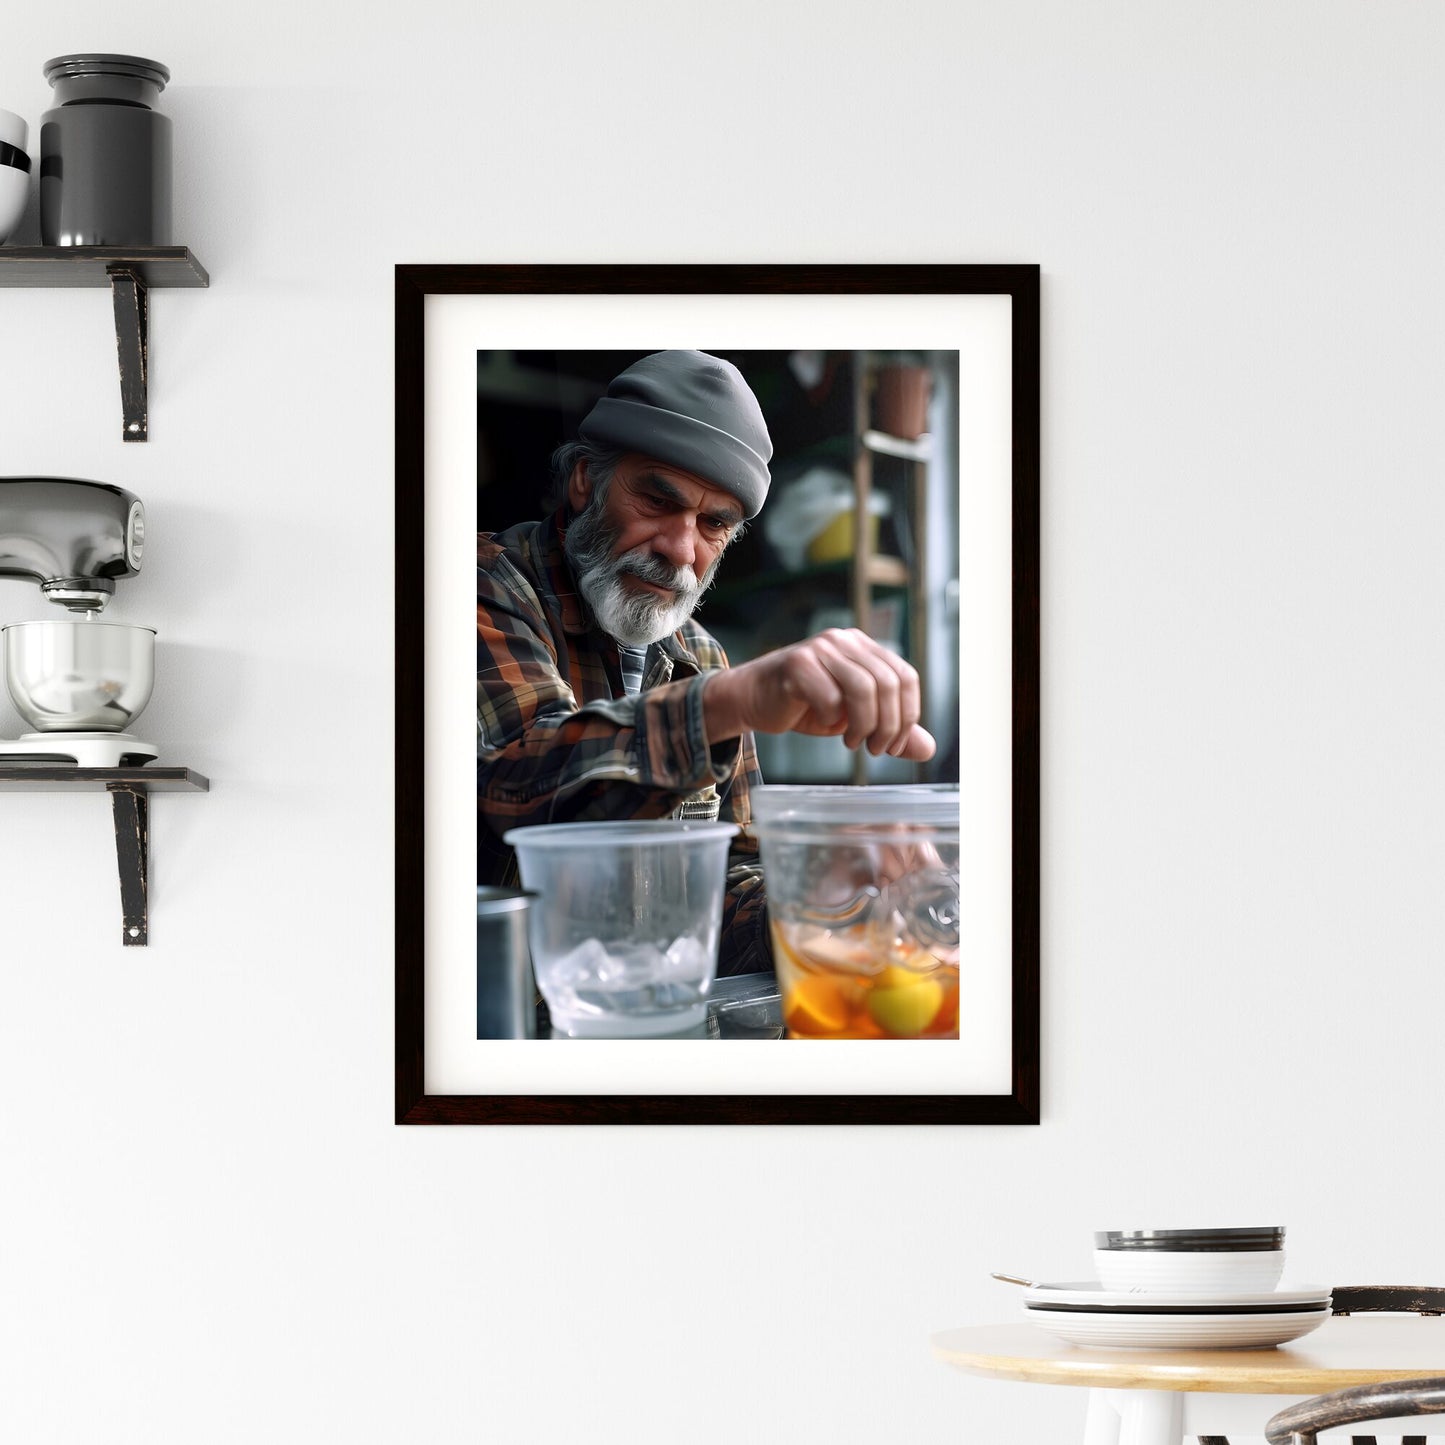 The Communion of Saints, Catholic - Art print of a man with a beard and a hat Default Title